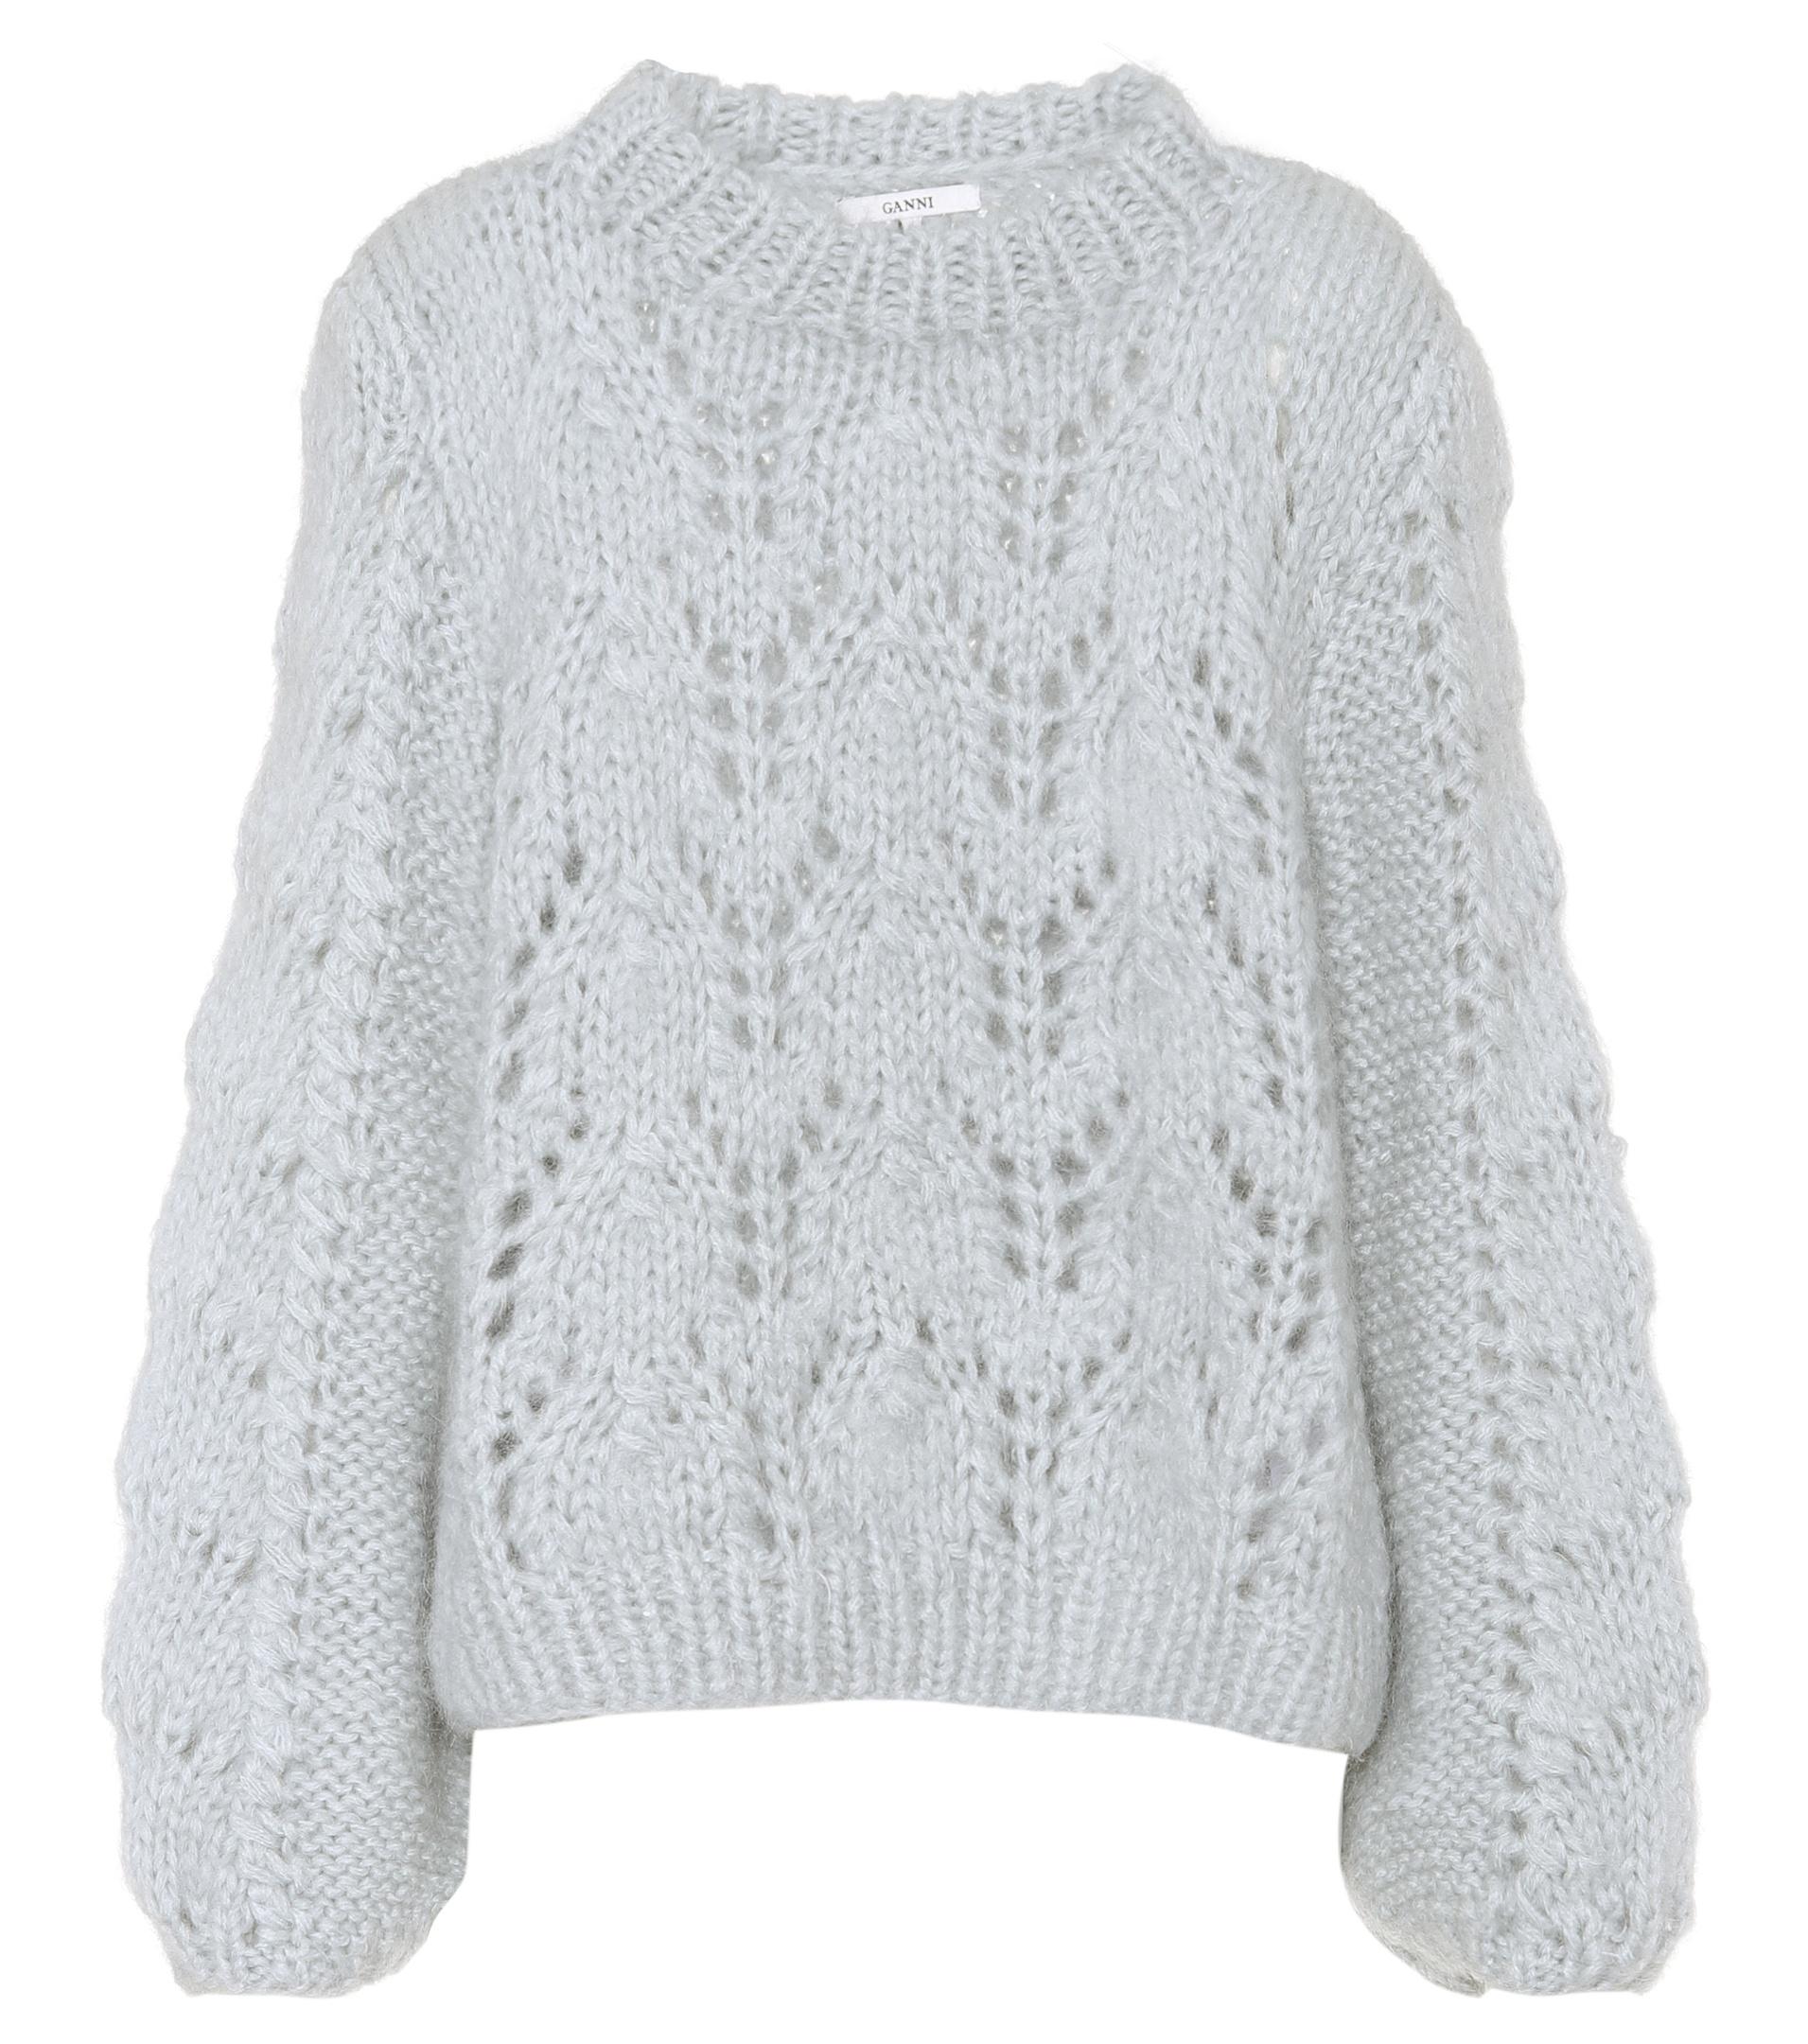 Ganni Faucher Wool And Mohair Sweater in Blue - Lyst